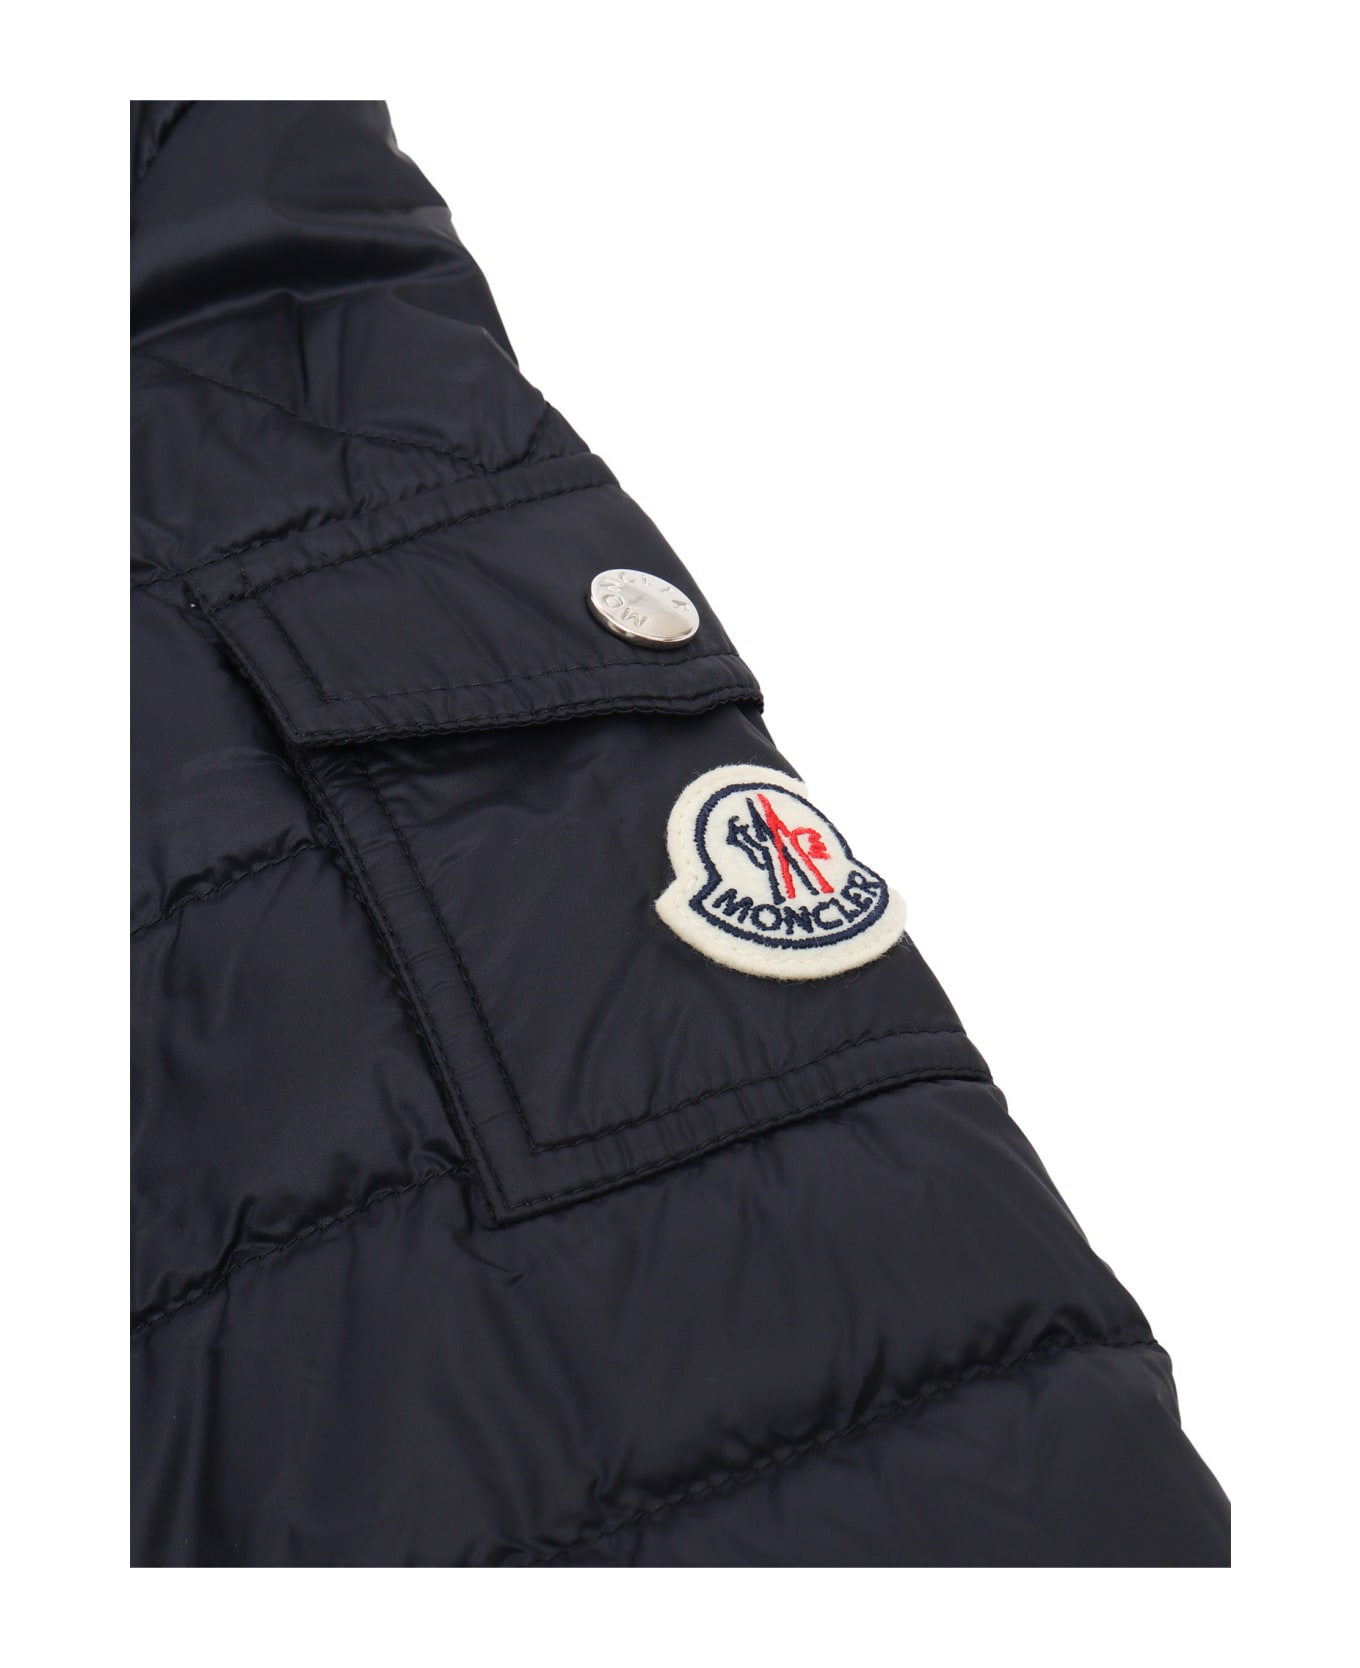 Moncler Lauros Hooded Down Jacket - BLUE